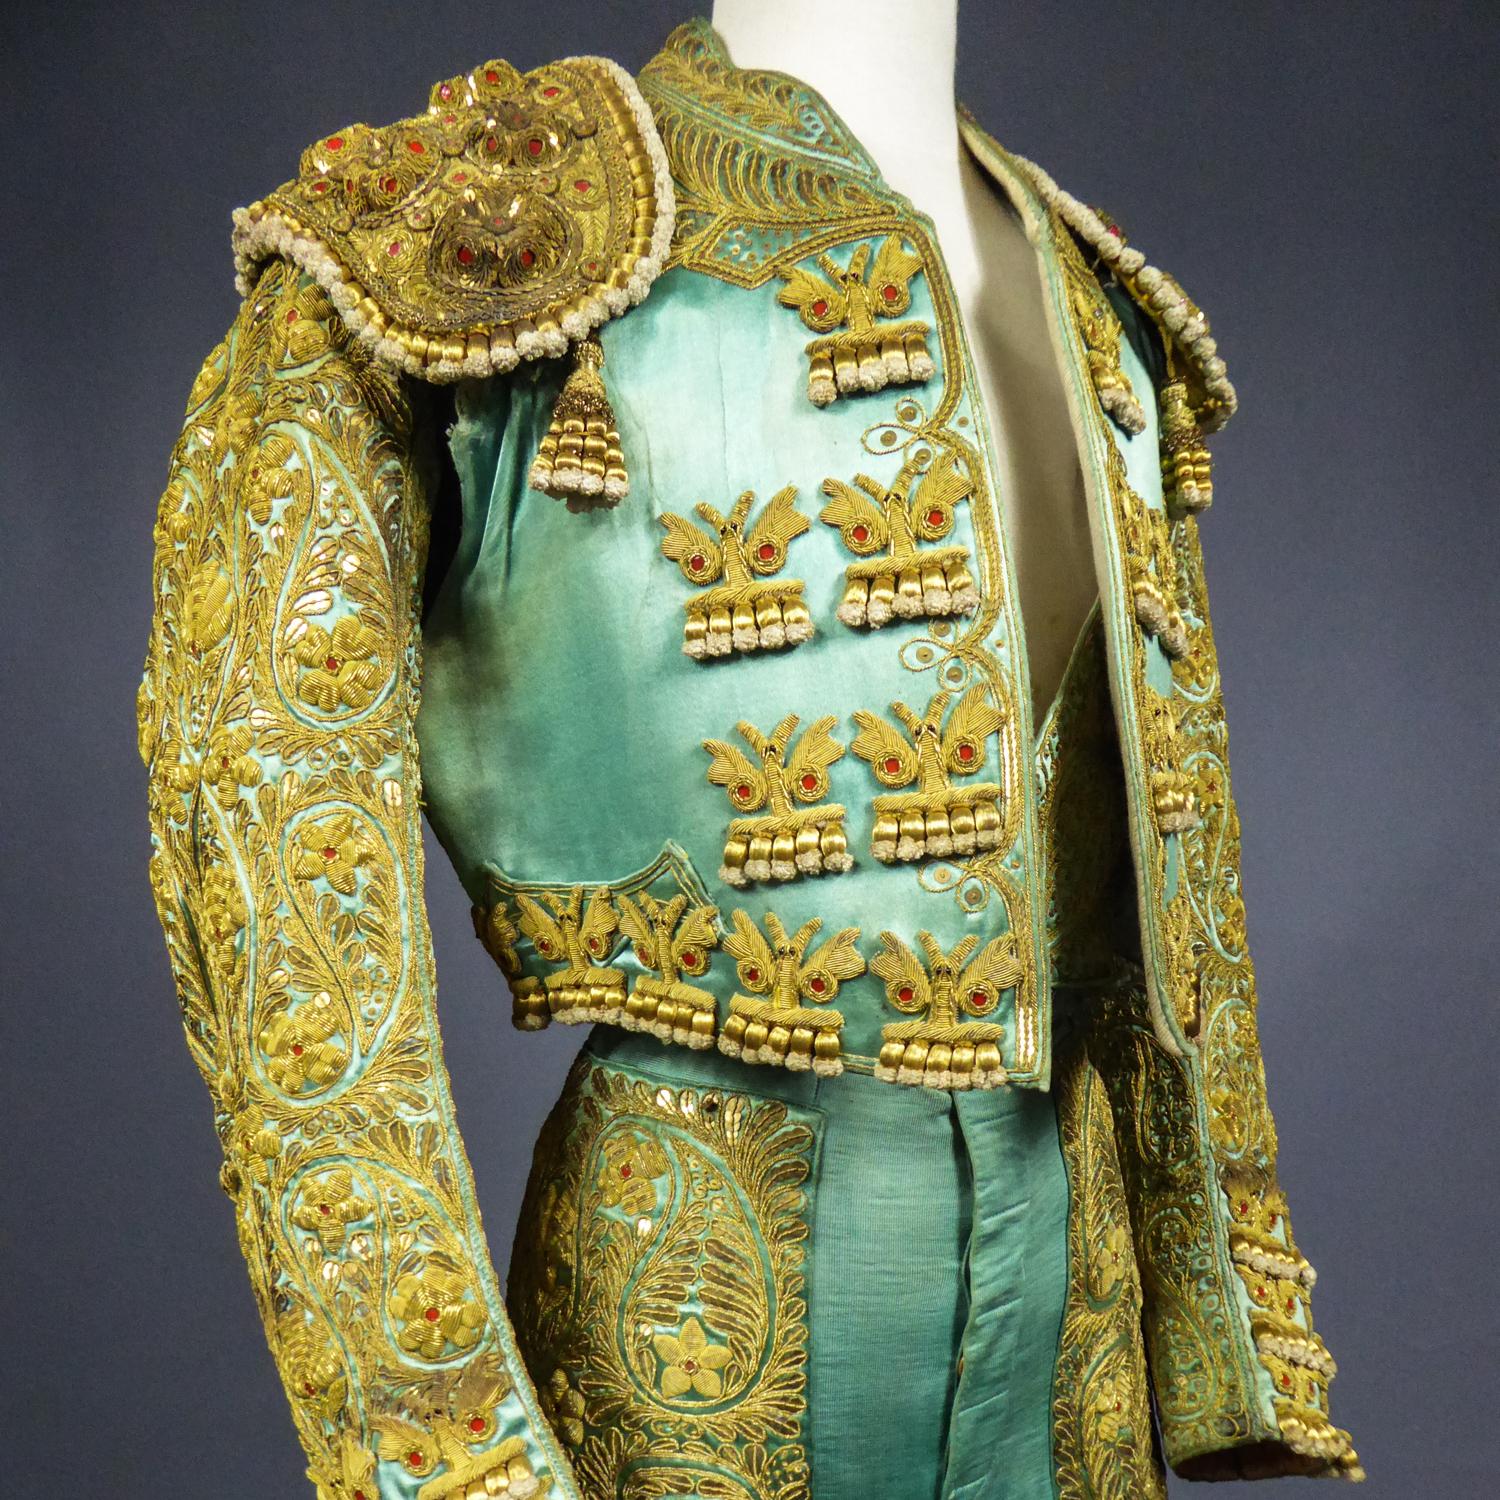 Second half 20th century
Spain Andalusia

Superb complete bullfighter's outfit or toreador suit signed Manfredi in Seville and dating from the second half of the twentieth century. Rich embroidery with sequins, pompons and gold chenillettes